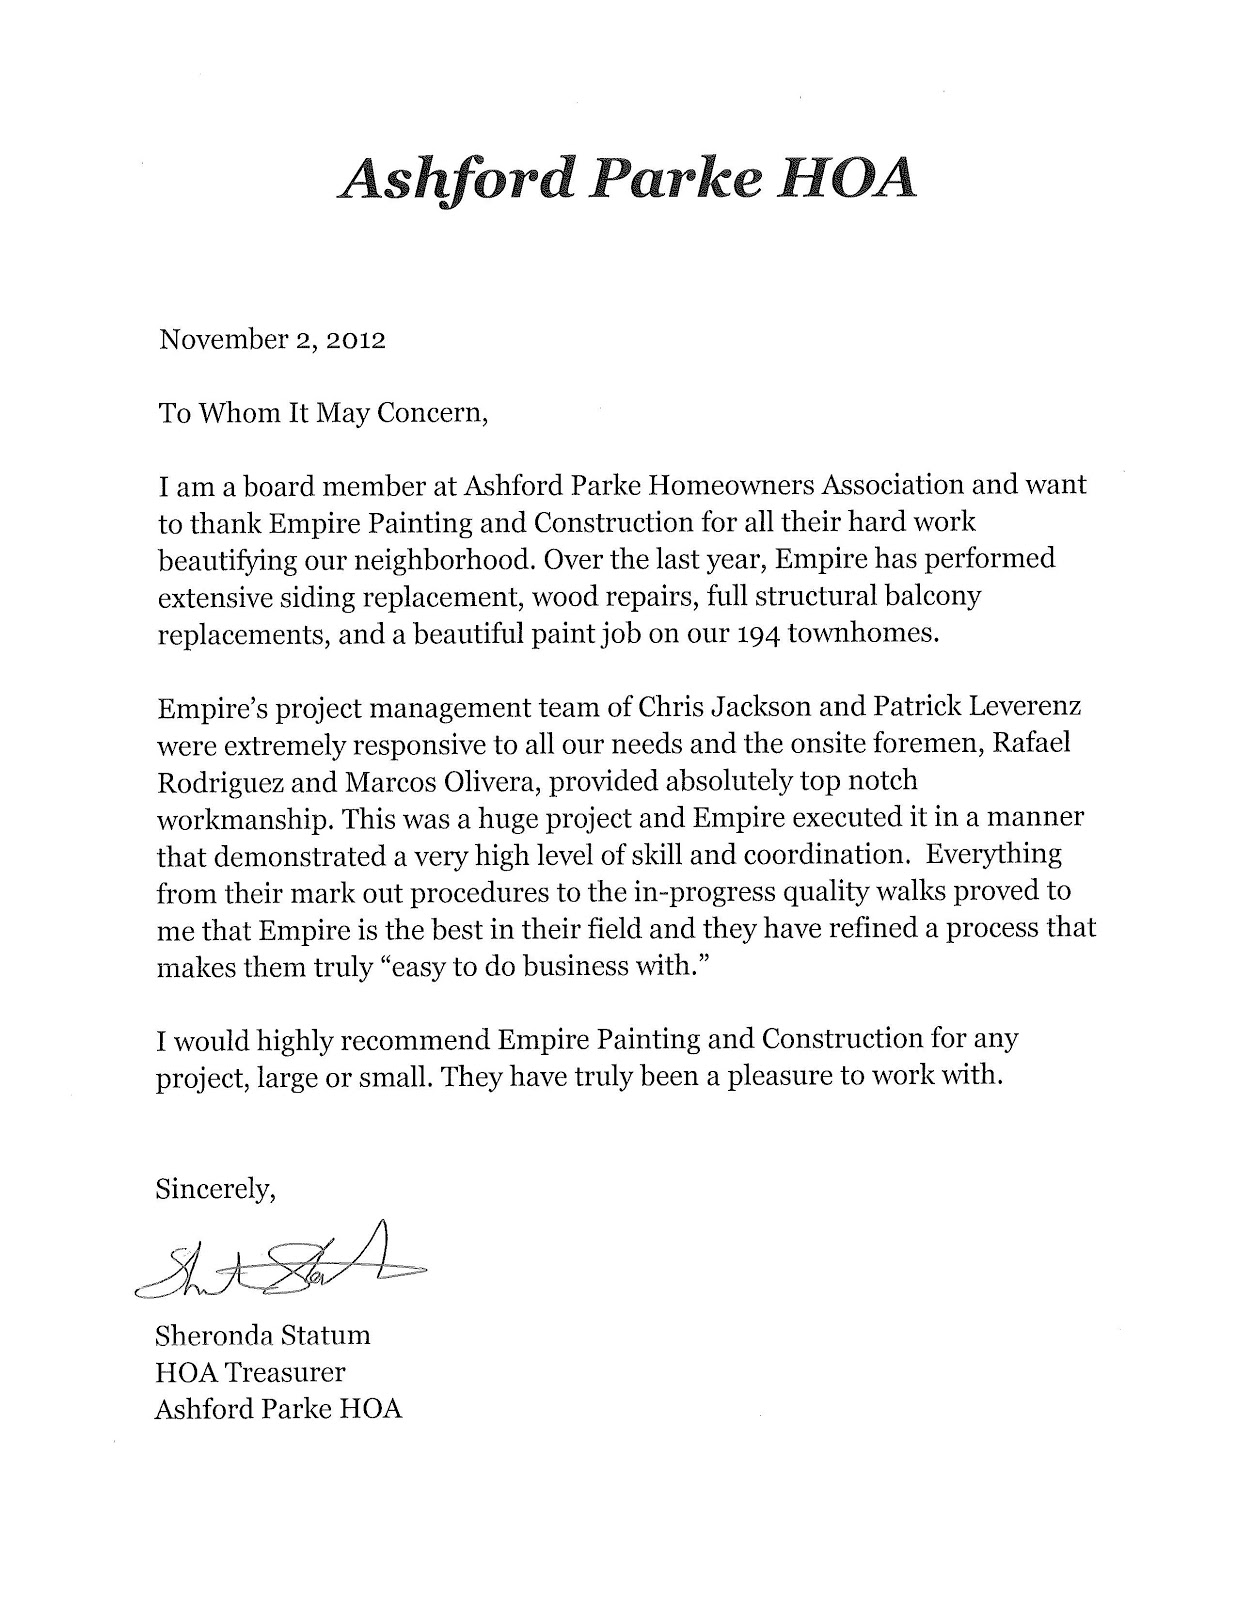 EmpireWorks Reviews and Resources: Ashford Park HOA Reference Letter